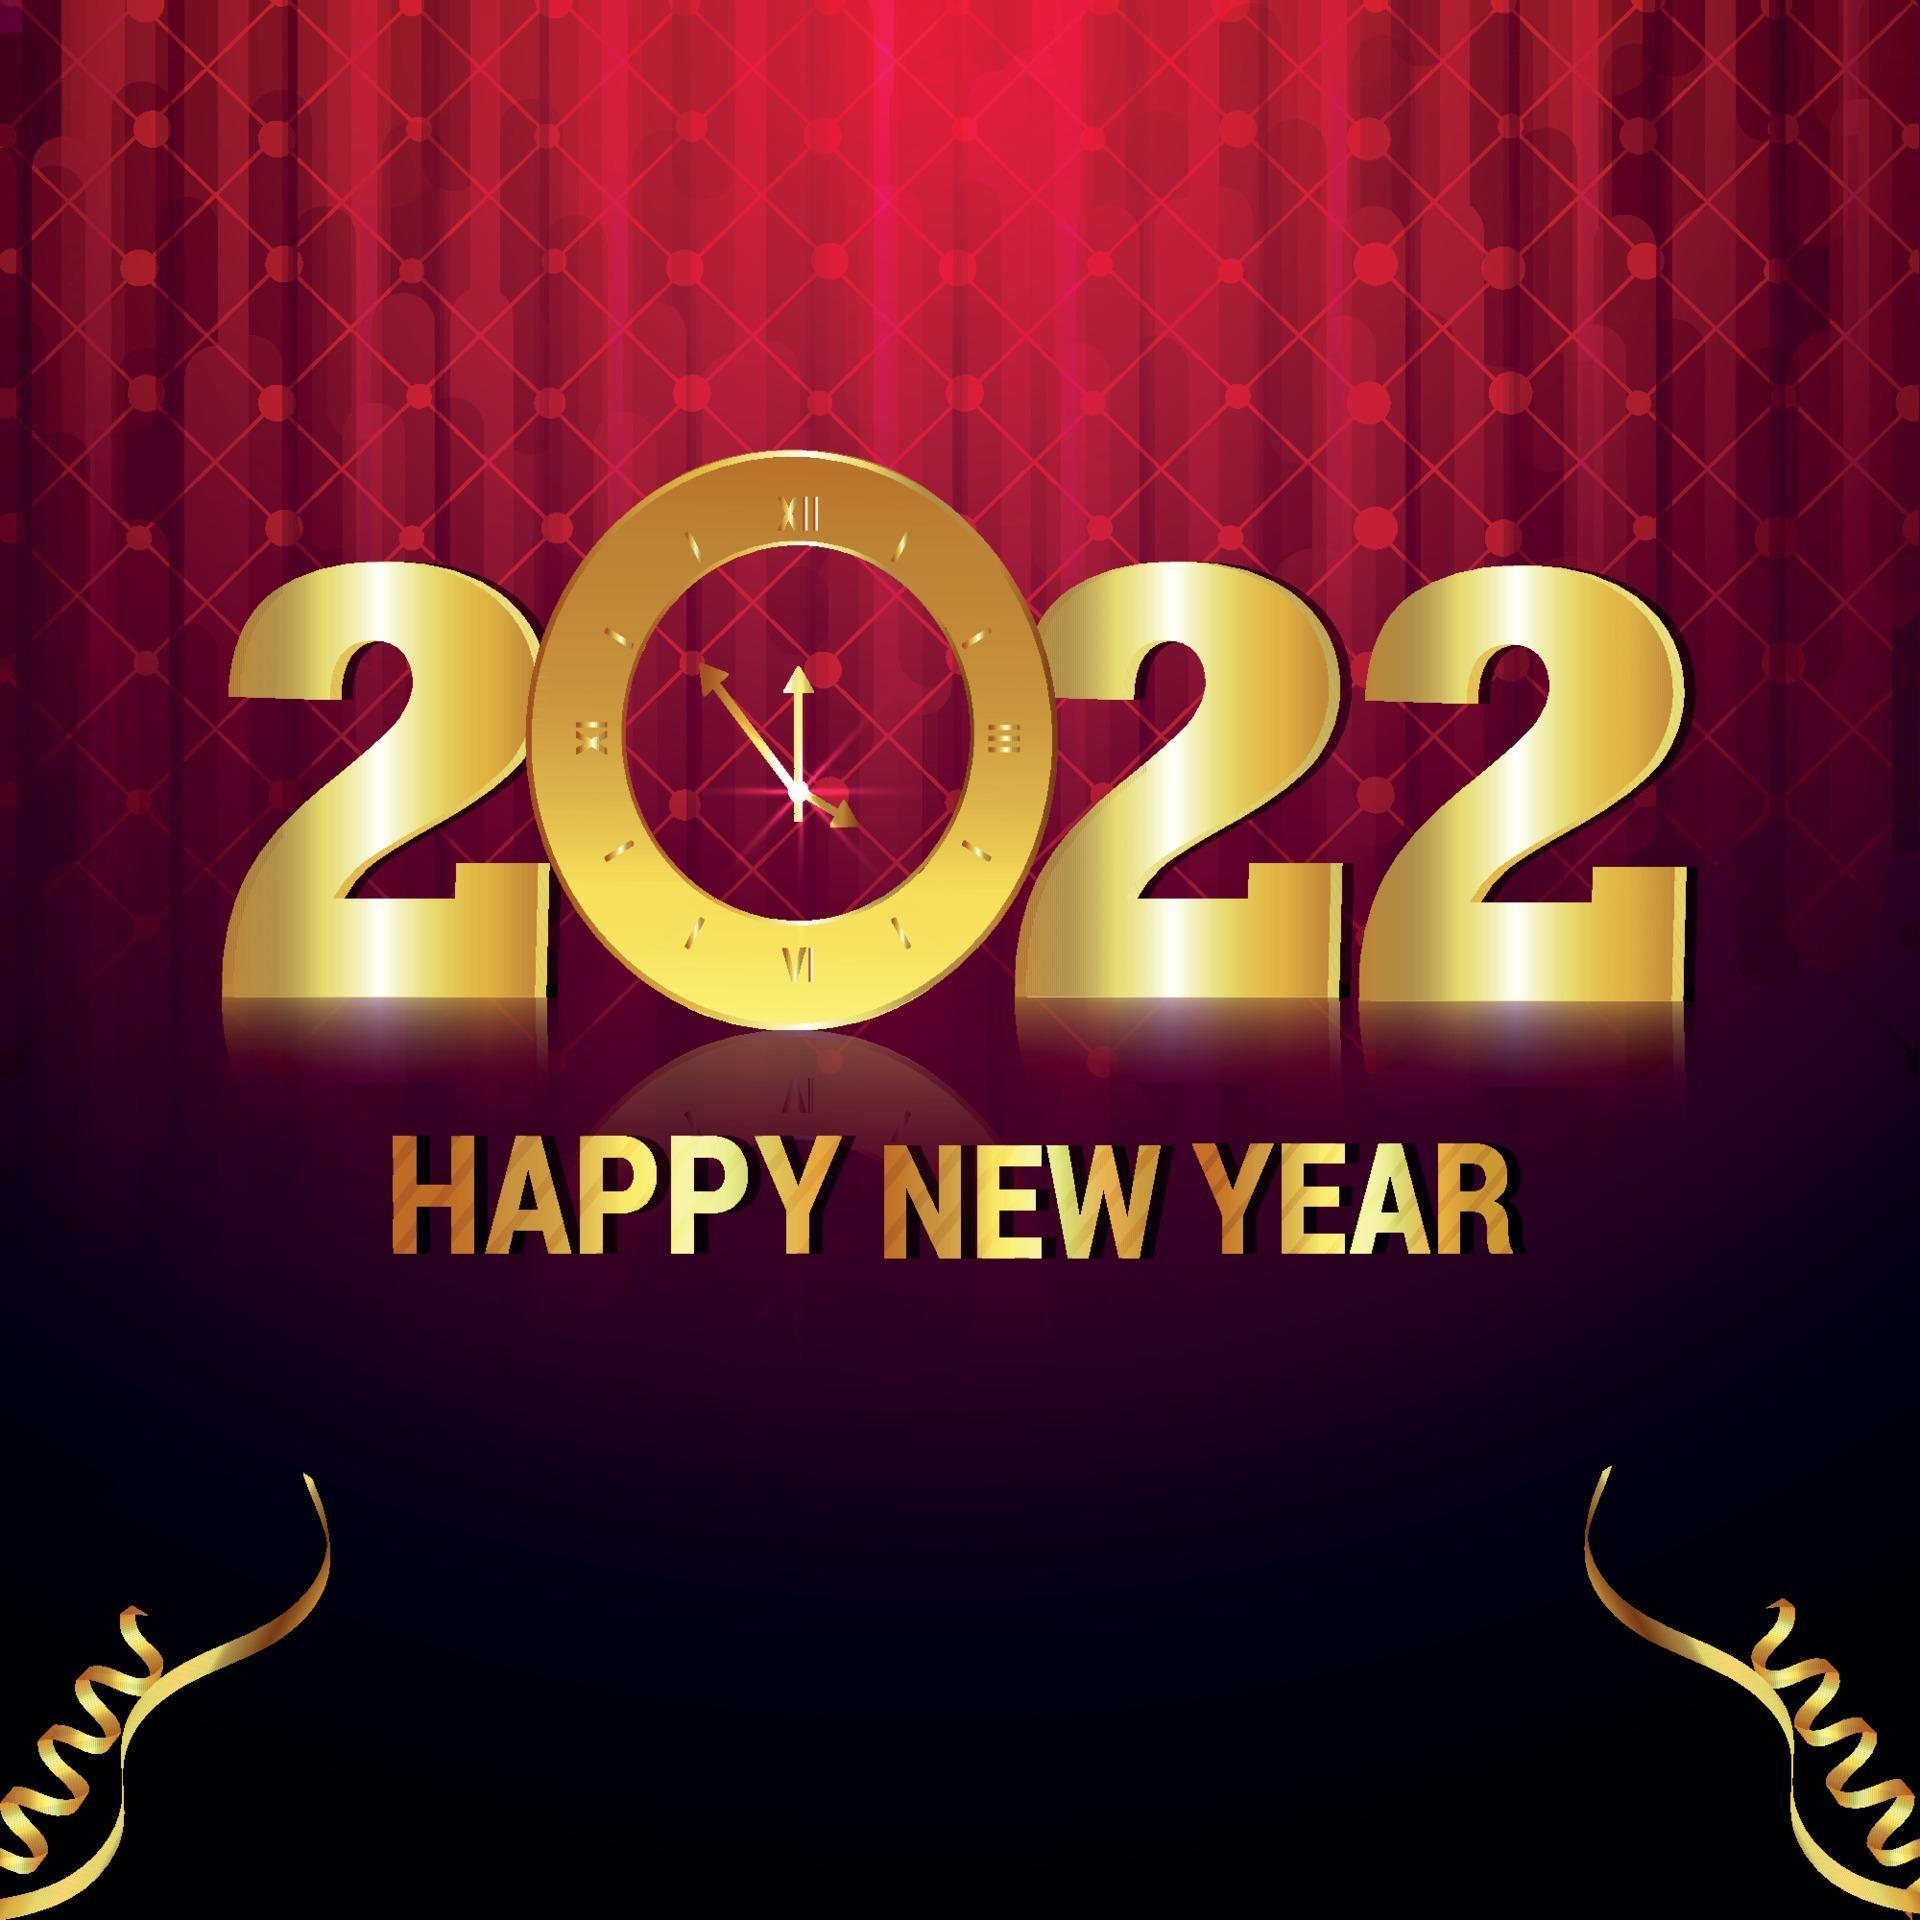 Happy new year 2022 celebration greeting card with golden text effect